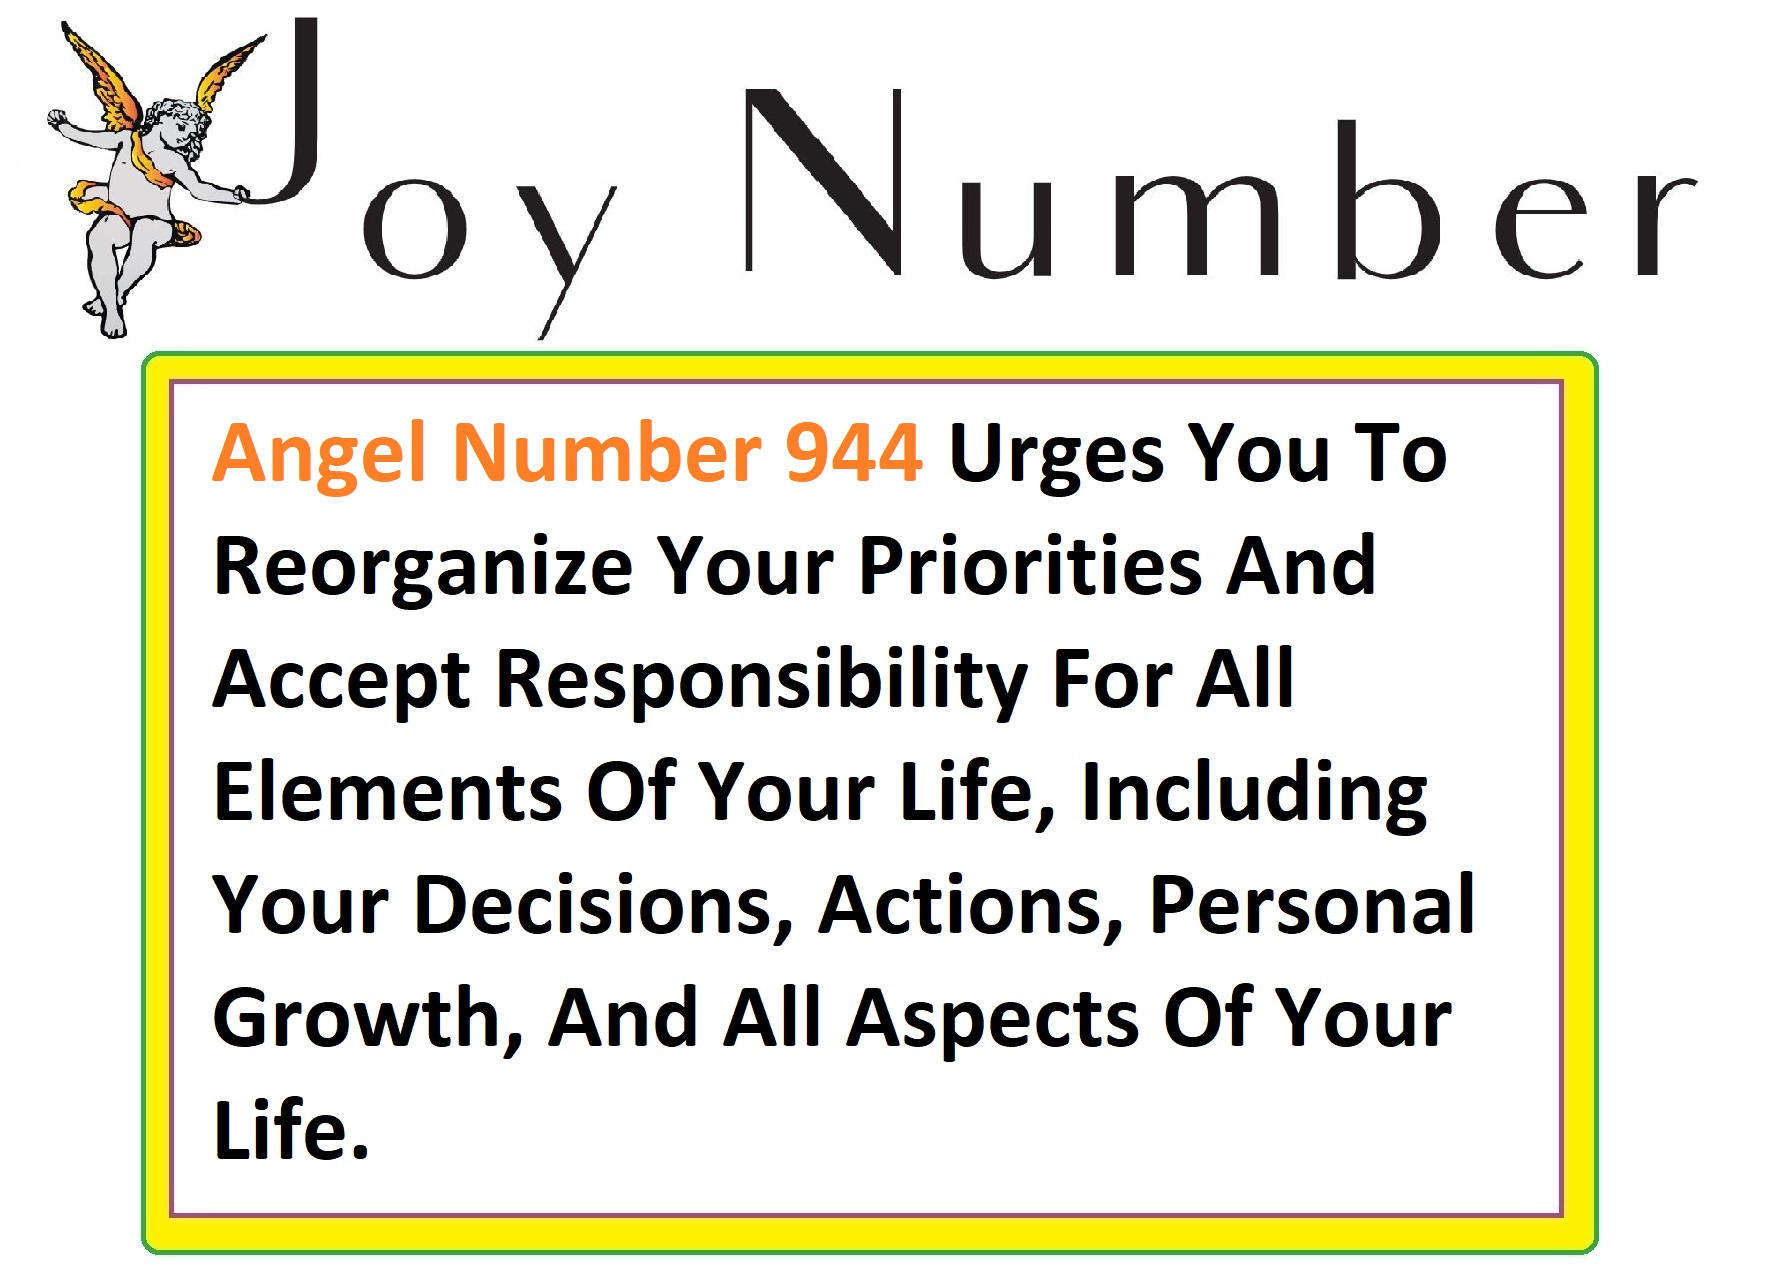 Angel Number 944 Represents A Message Of Spiritual Enlightenment